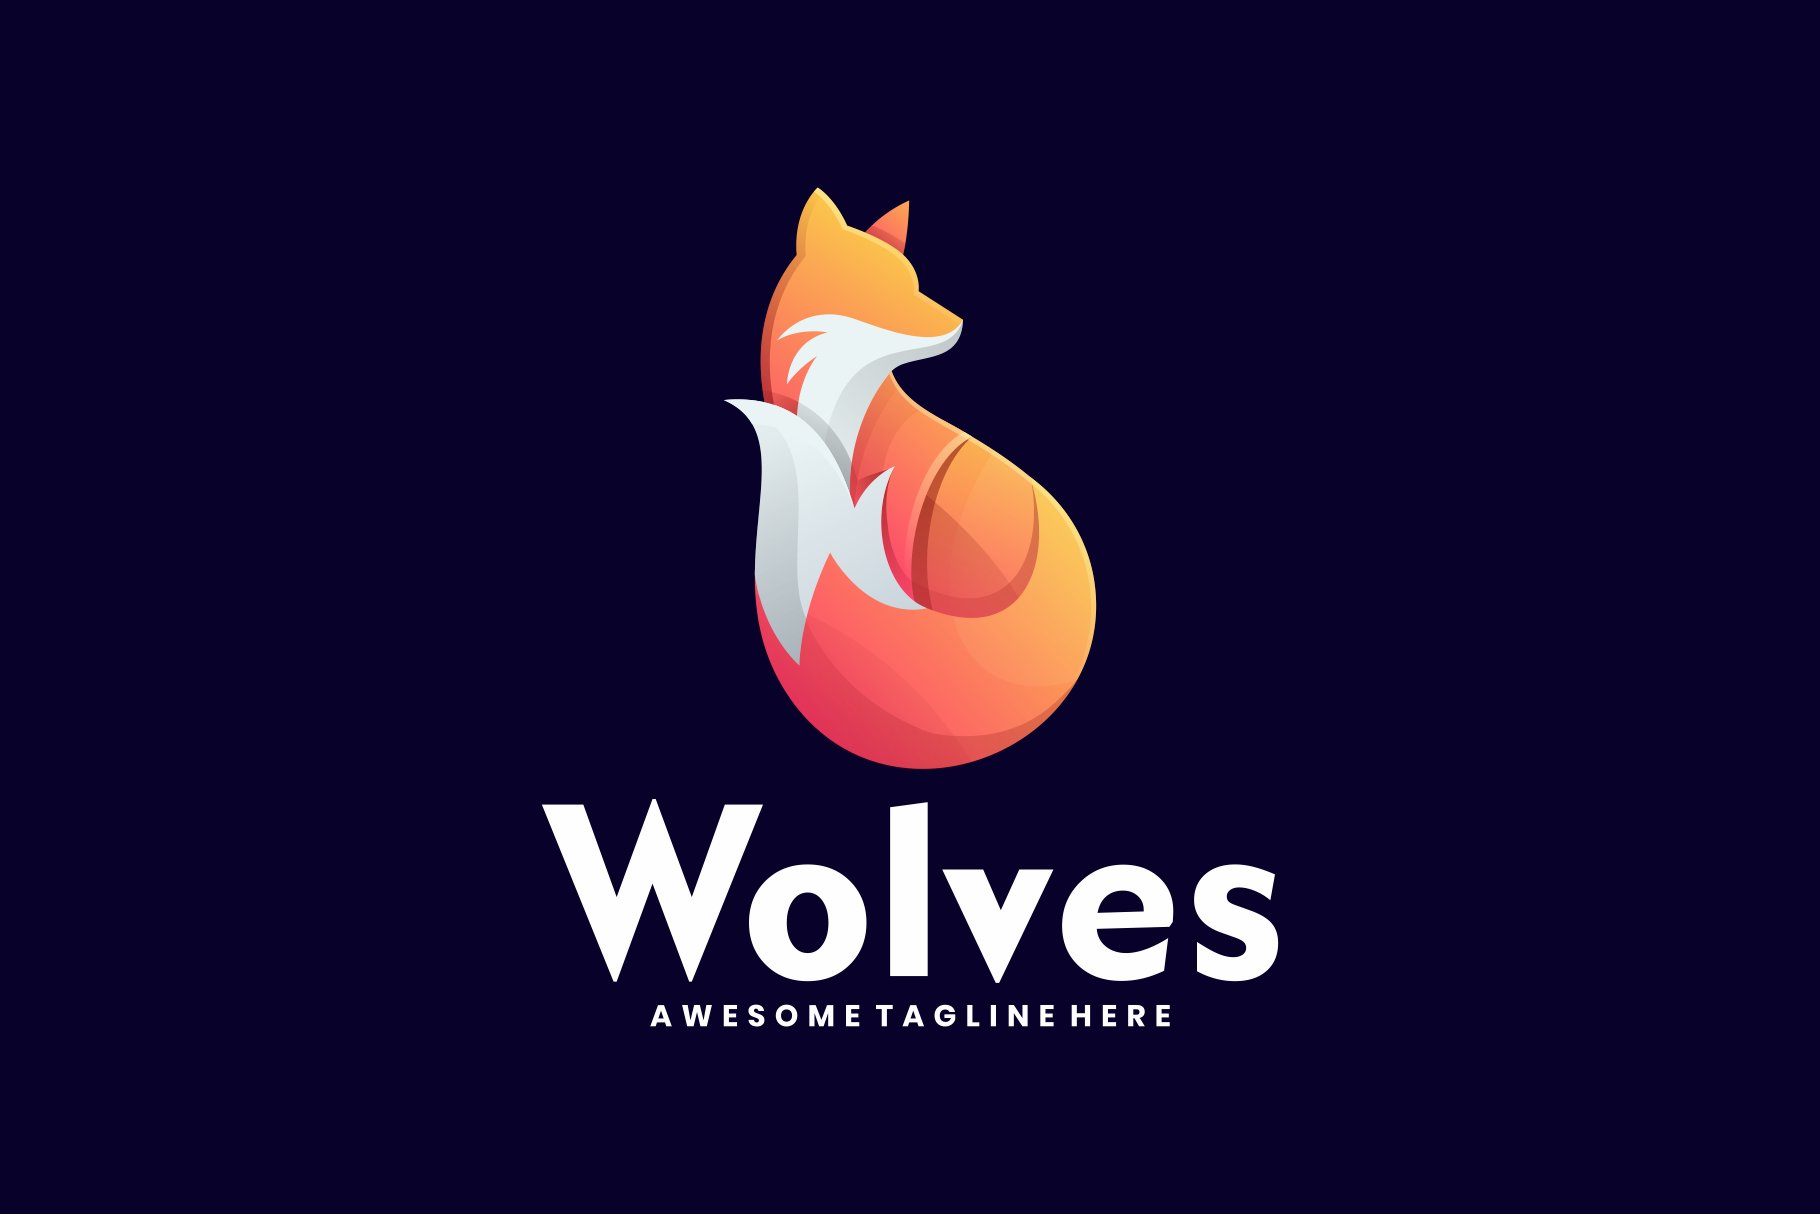 Wolves Gradient Colorful Style. cover image.